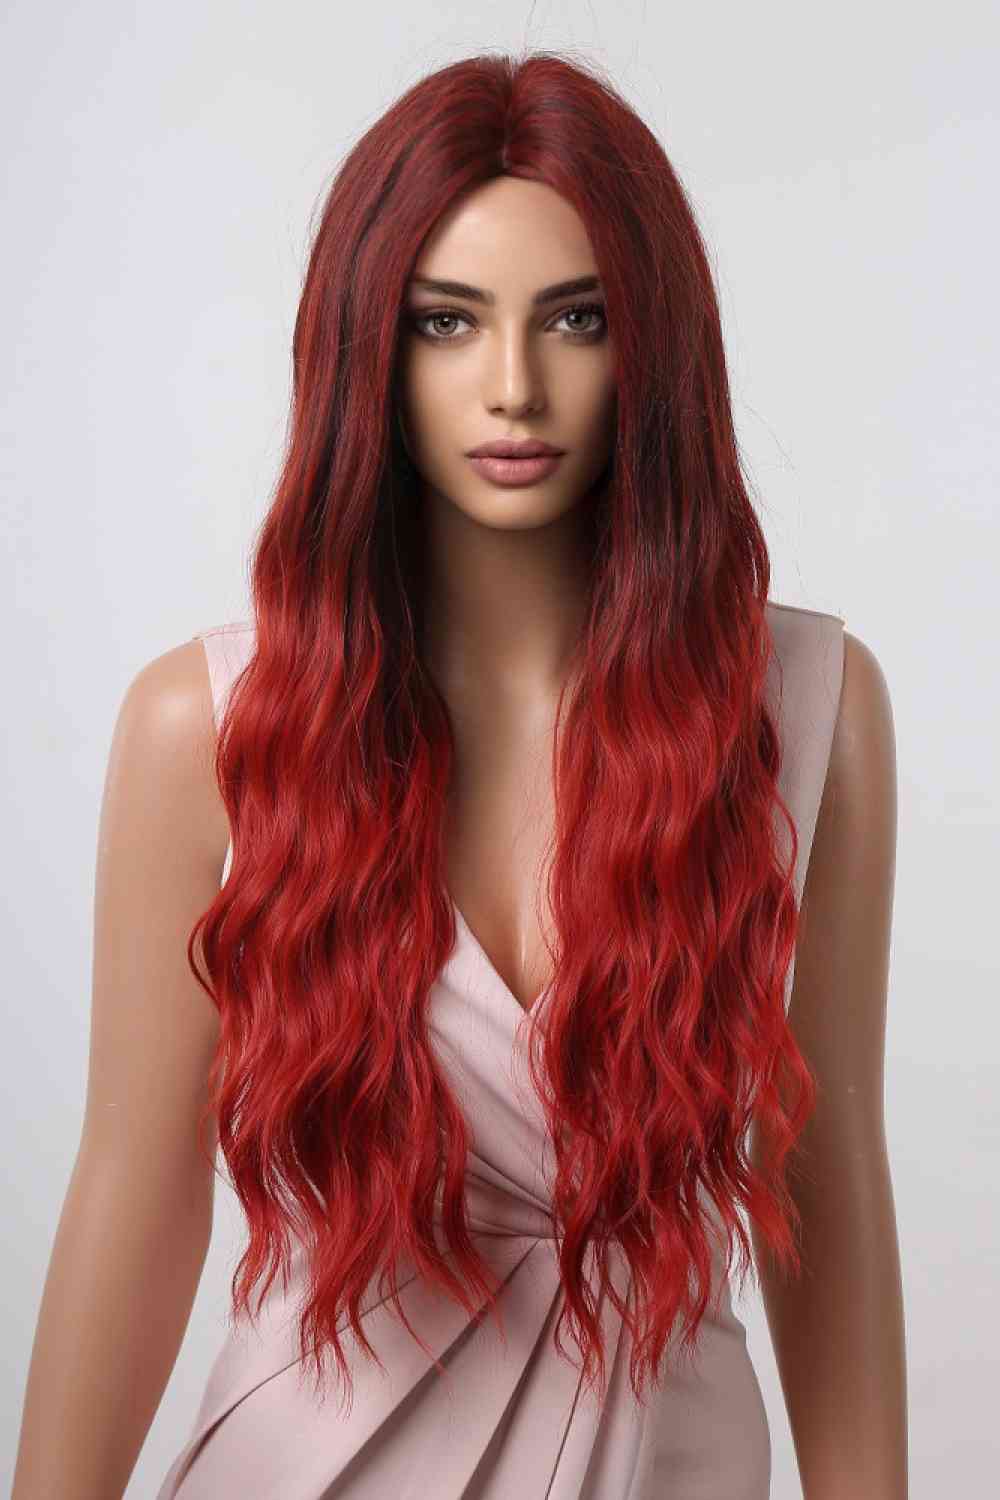 13*1" Full-Machine Wigs Synthetic Long Wave 27" Red Ombre One Size 